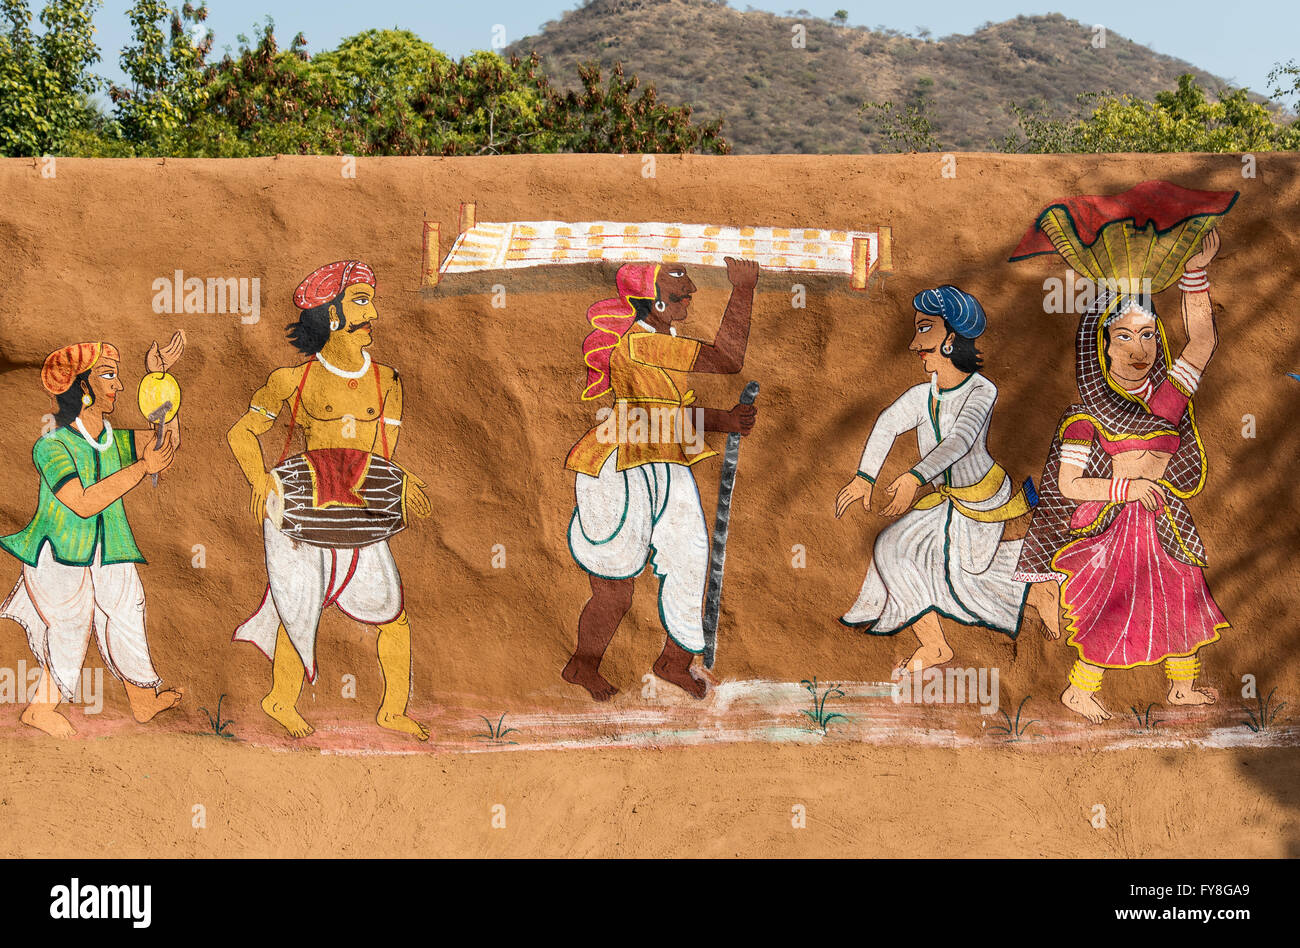 Traditional painting on a clay wall in rural Rajasthan, Shilpgram Crafts Village near Udaipur, Rajasthan, India Stock Photo